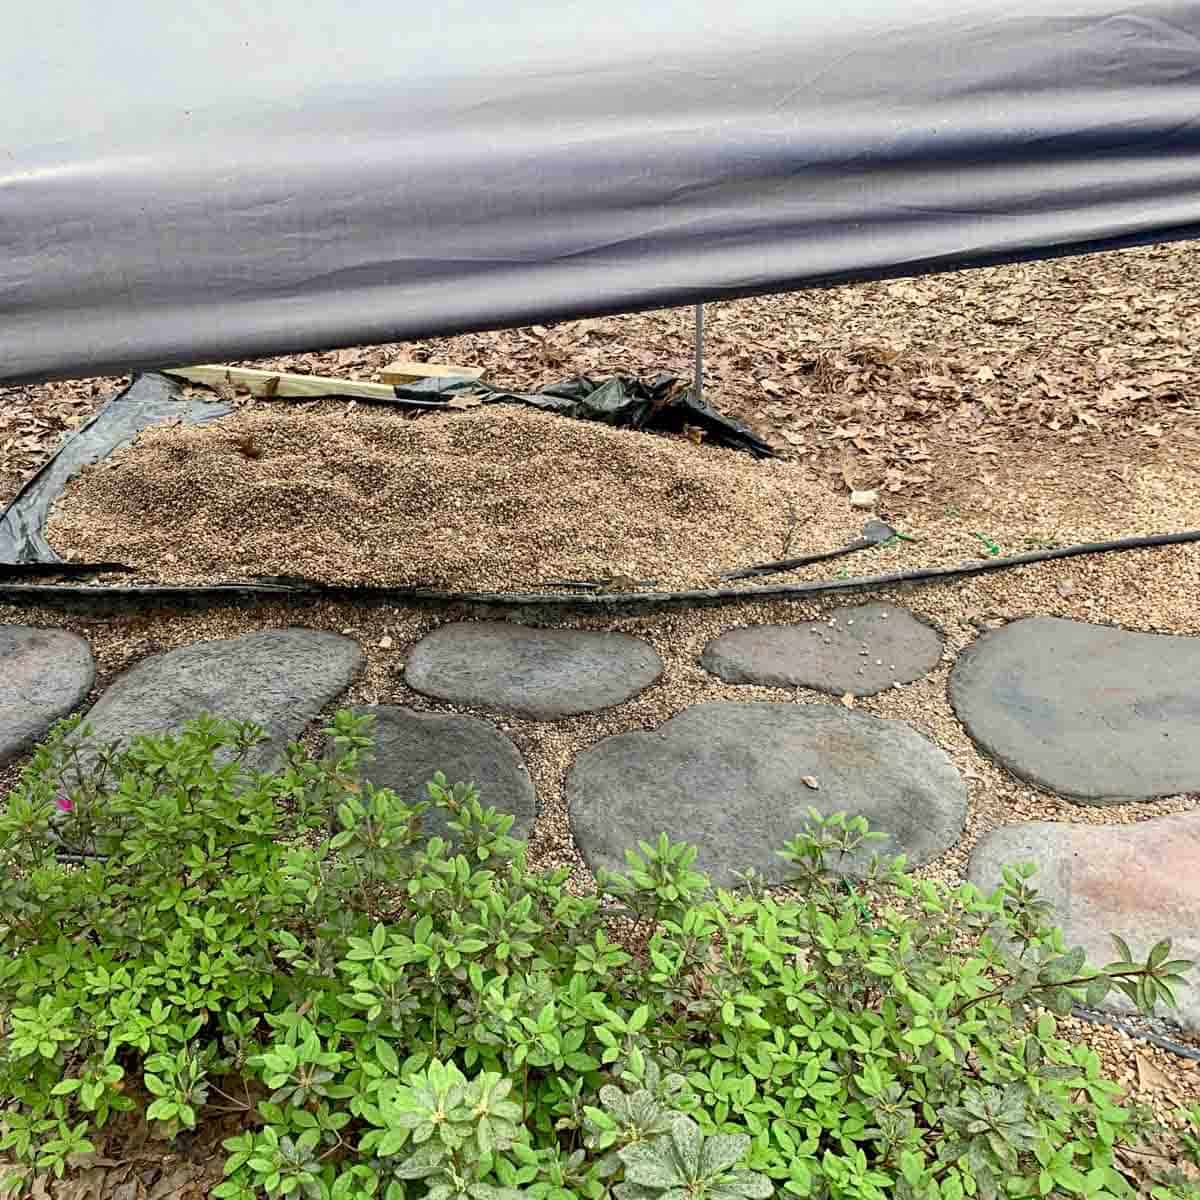 DIY Concrete Stepping Stones That Look Natural | Artsy Pretty Plants